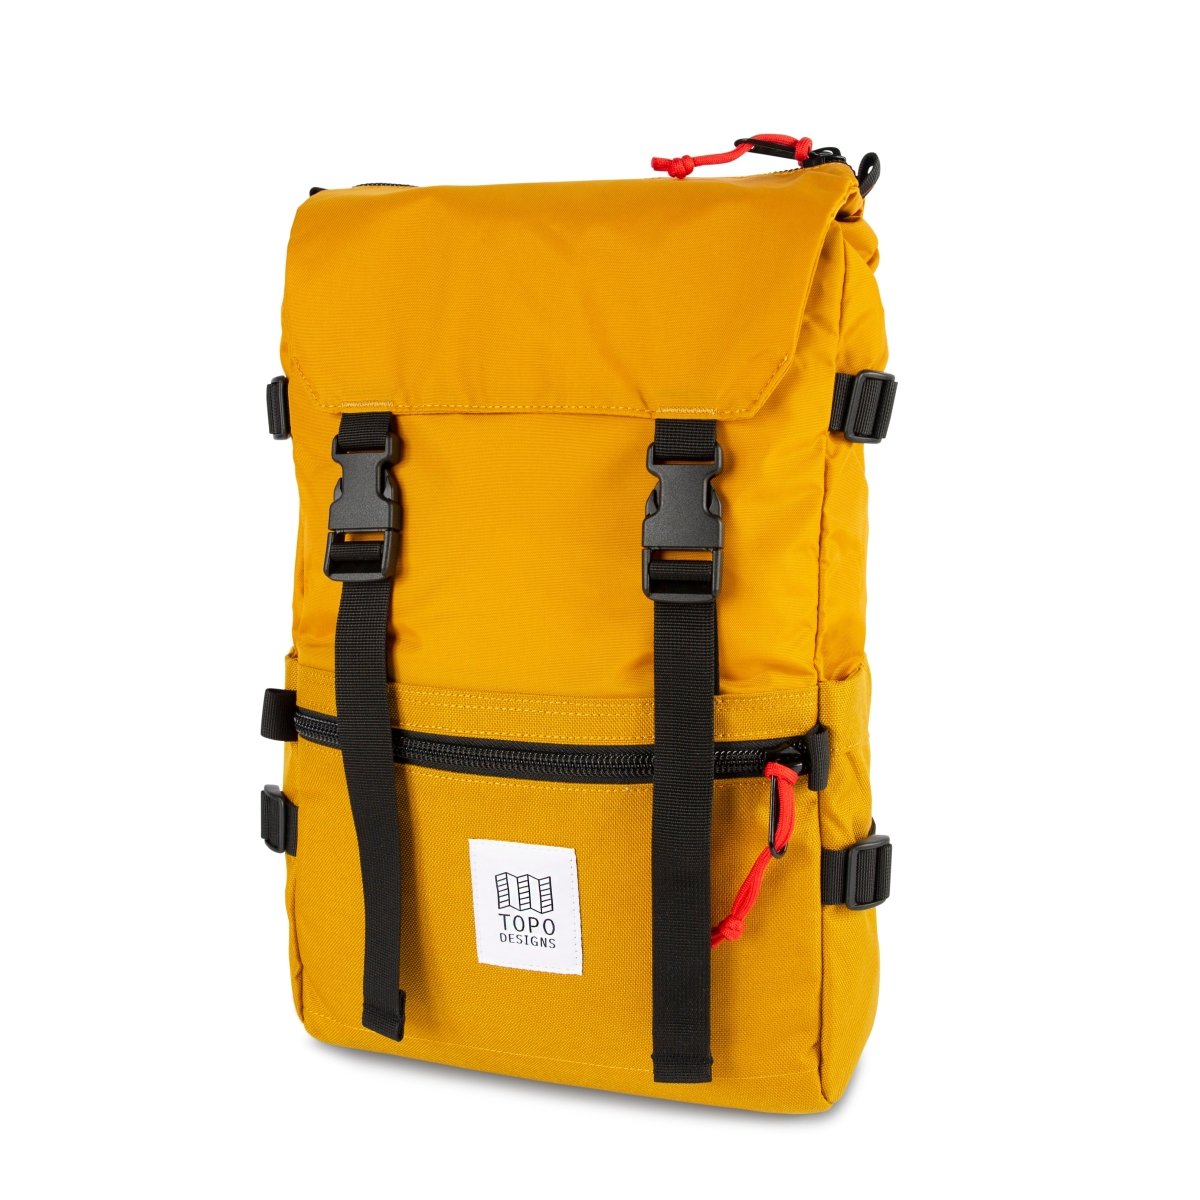 TOPO DESIGNS ROVER PACK - Boutique Homies